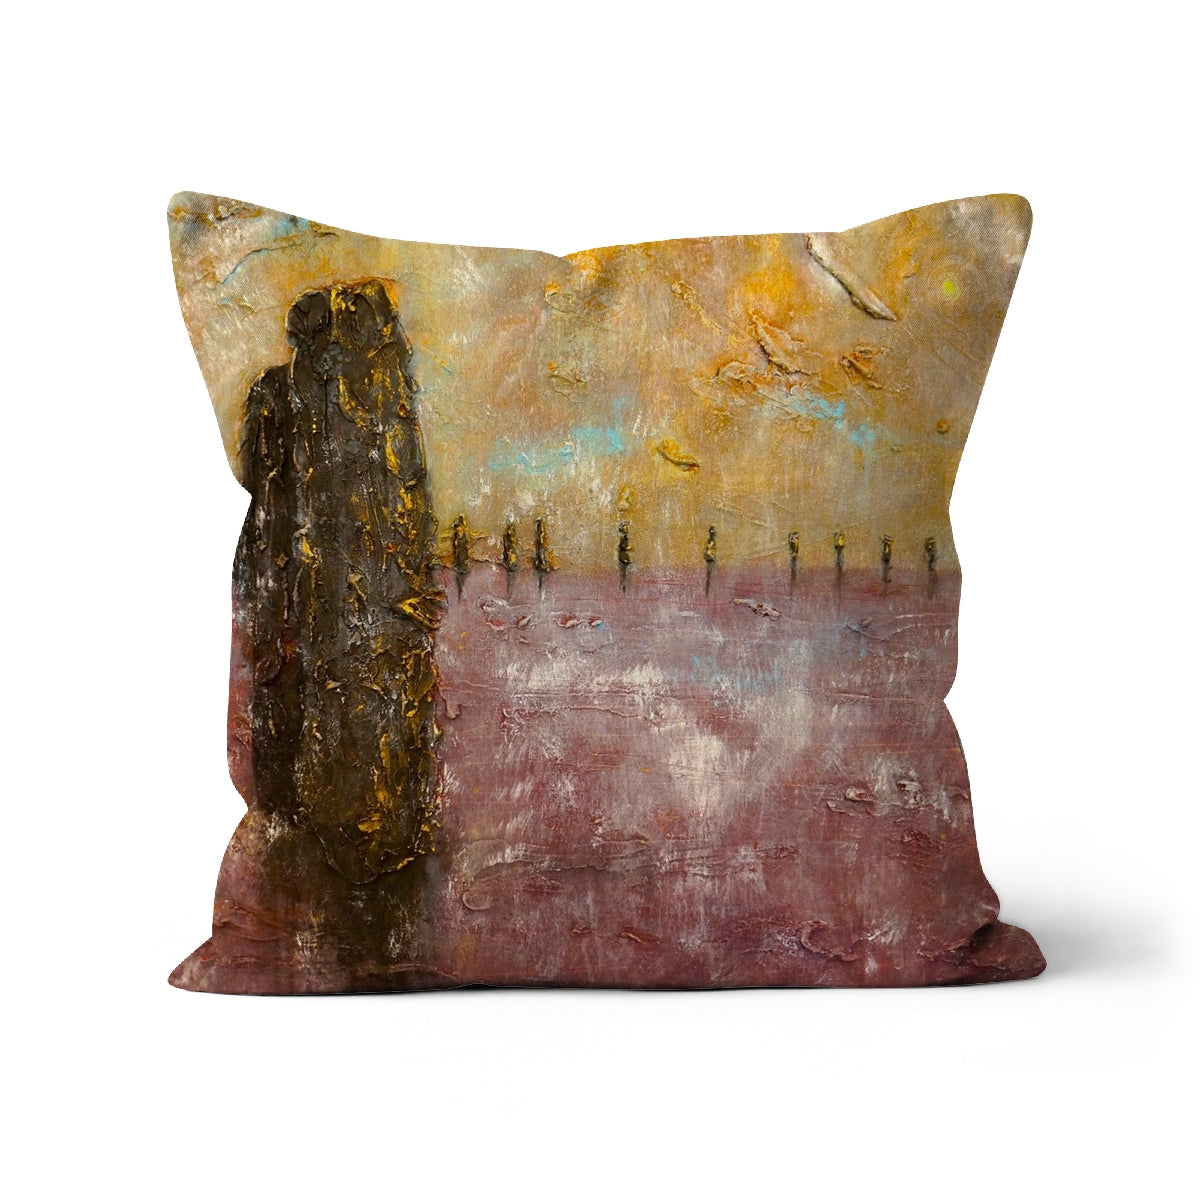 Brodgar Mist Orkney Art Gifts Cushion-Cushions-Orkney Art Gallery-Faux Suede-16"x16"-Paintings, Prints, Homeware, Art Gifts From Scotland By Scottish Artist Kevin Hunter